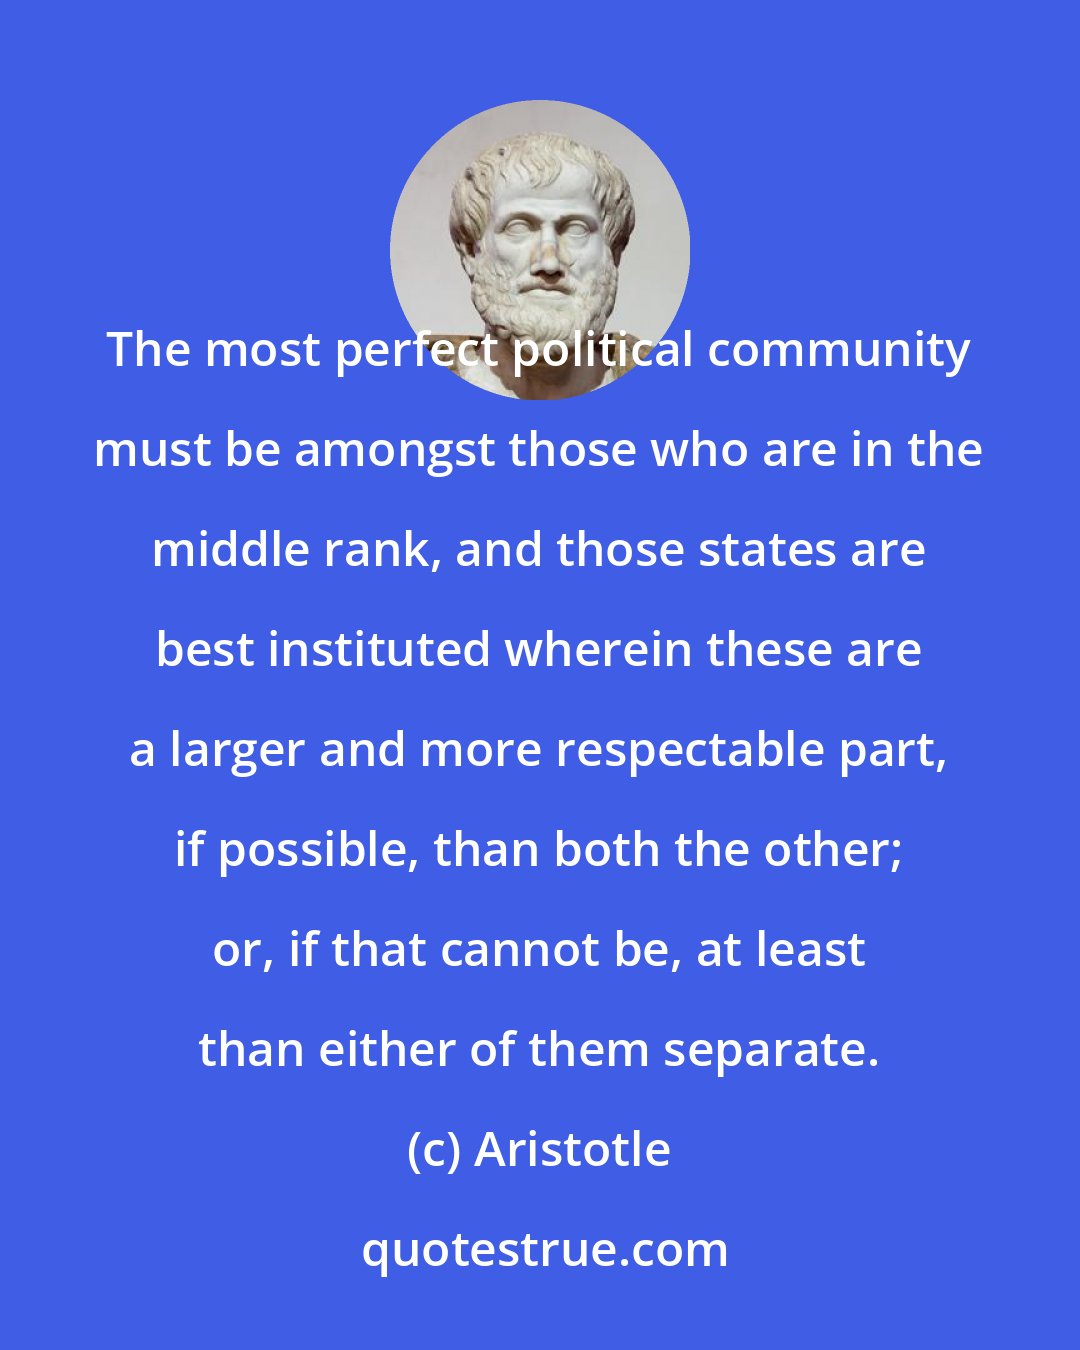 Aristotle: The most perfect political community must be amongst those who are in the middle rank, and those states are best instituted wherein these are a larger and more respectable part, if possible, than both the other; or, if that cannot be, at least than either of them separate.